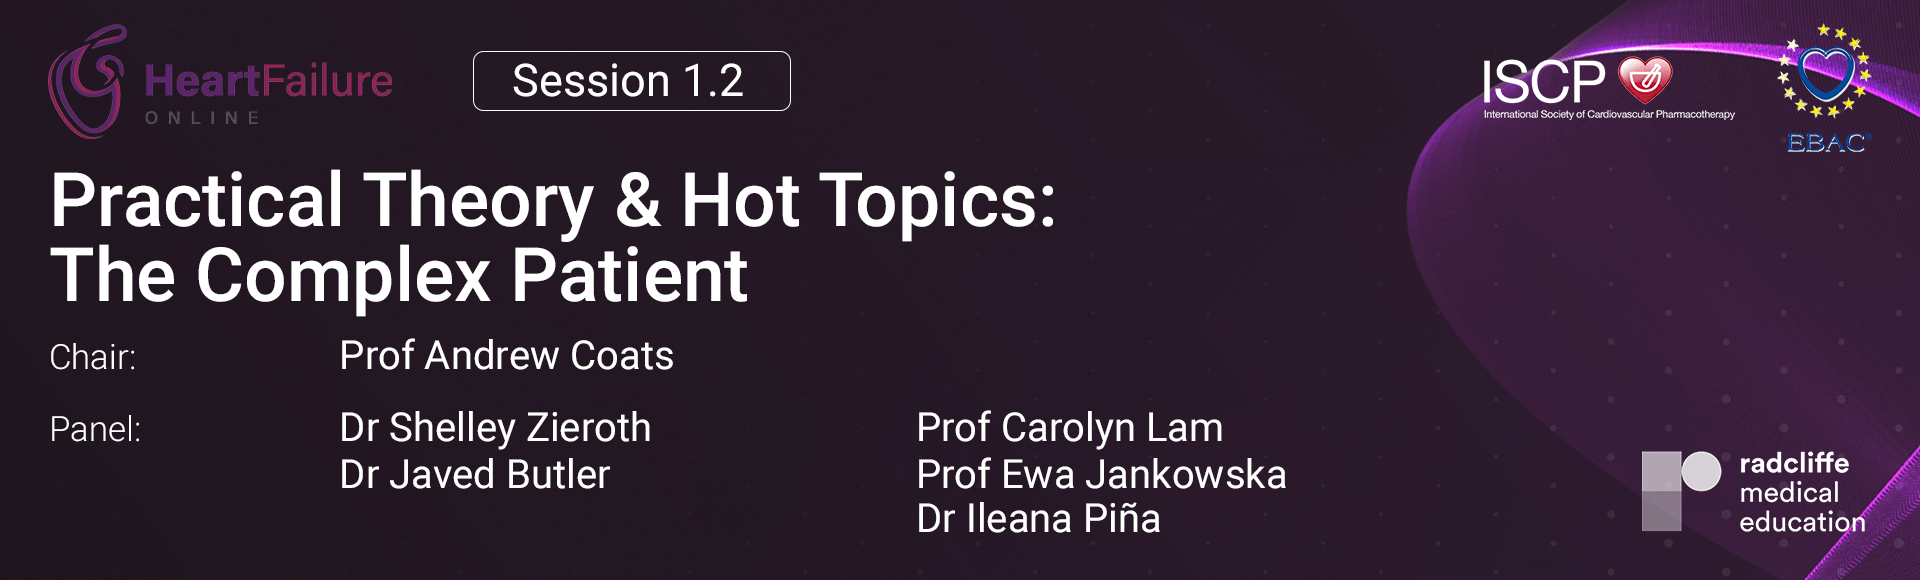 HFO 2022 - Session 1.2 Practical Theory & Hot Topics: The Complex Patient